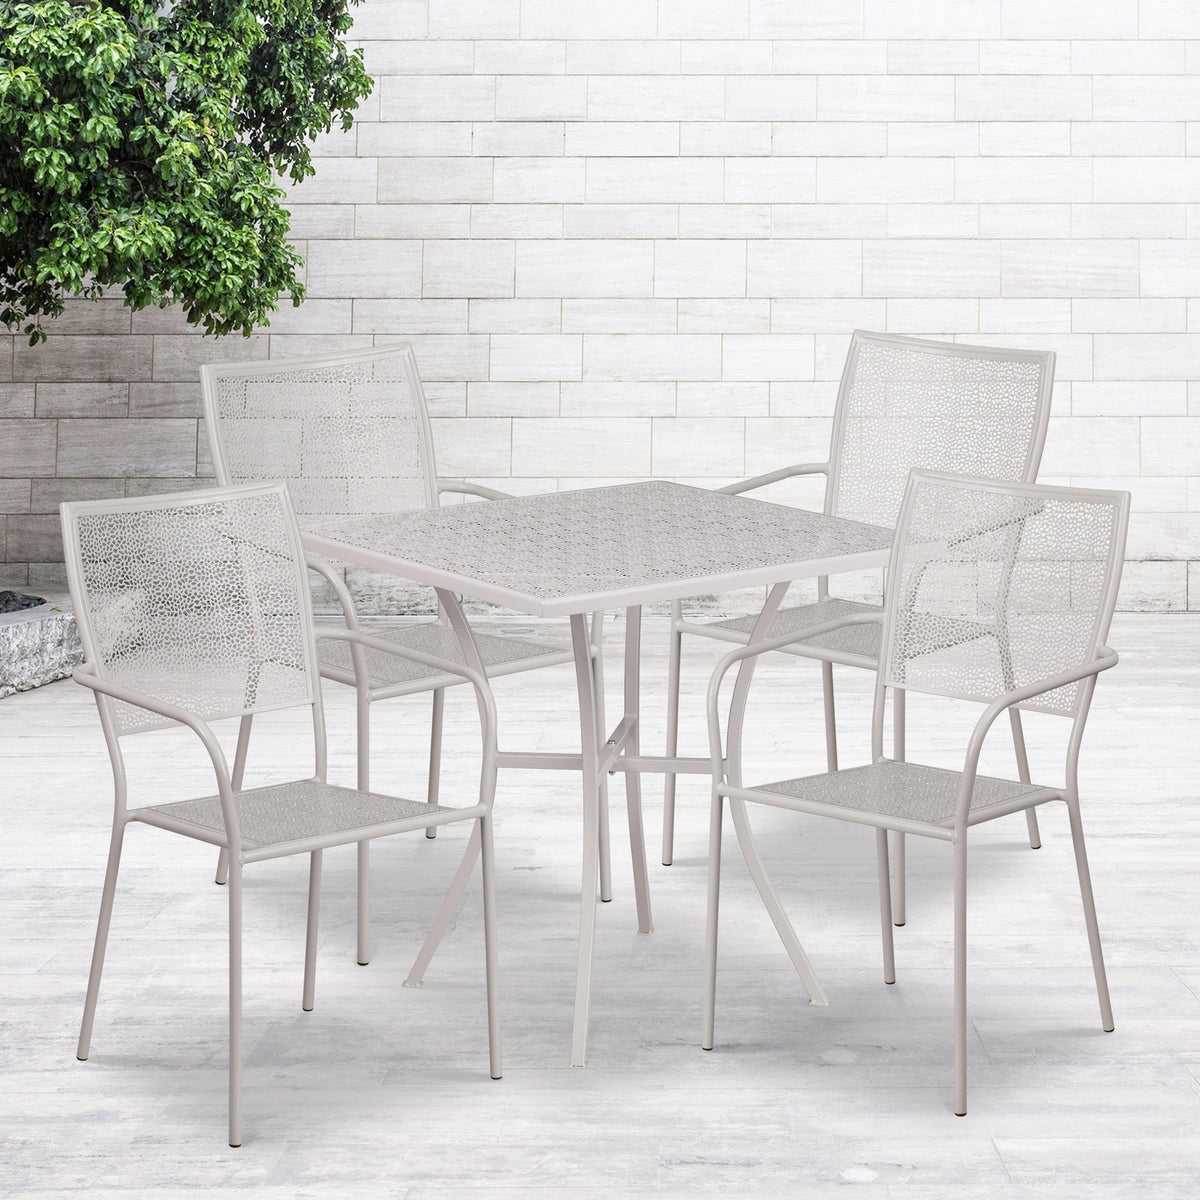 Light Gray |#| 28inch Square Lt Gray Indoor-Outdoor Steel Patio Table Set - 4 Square Back Chairs